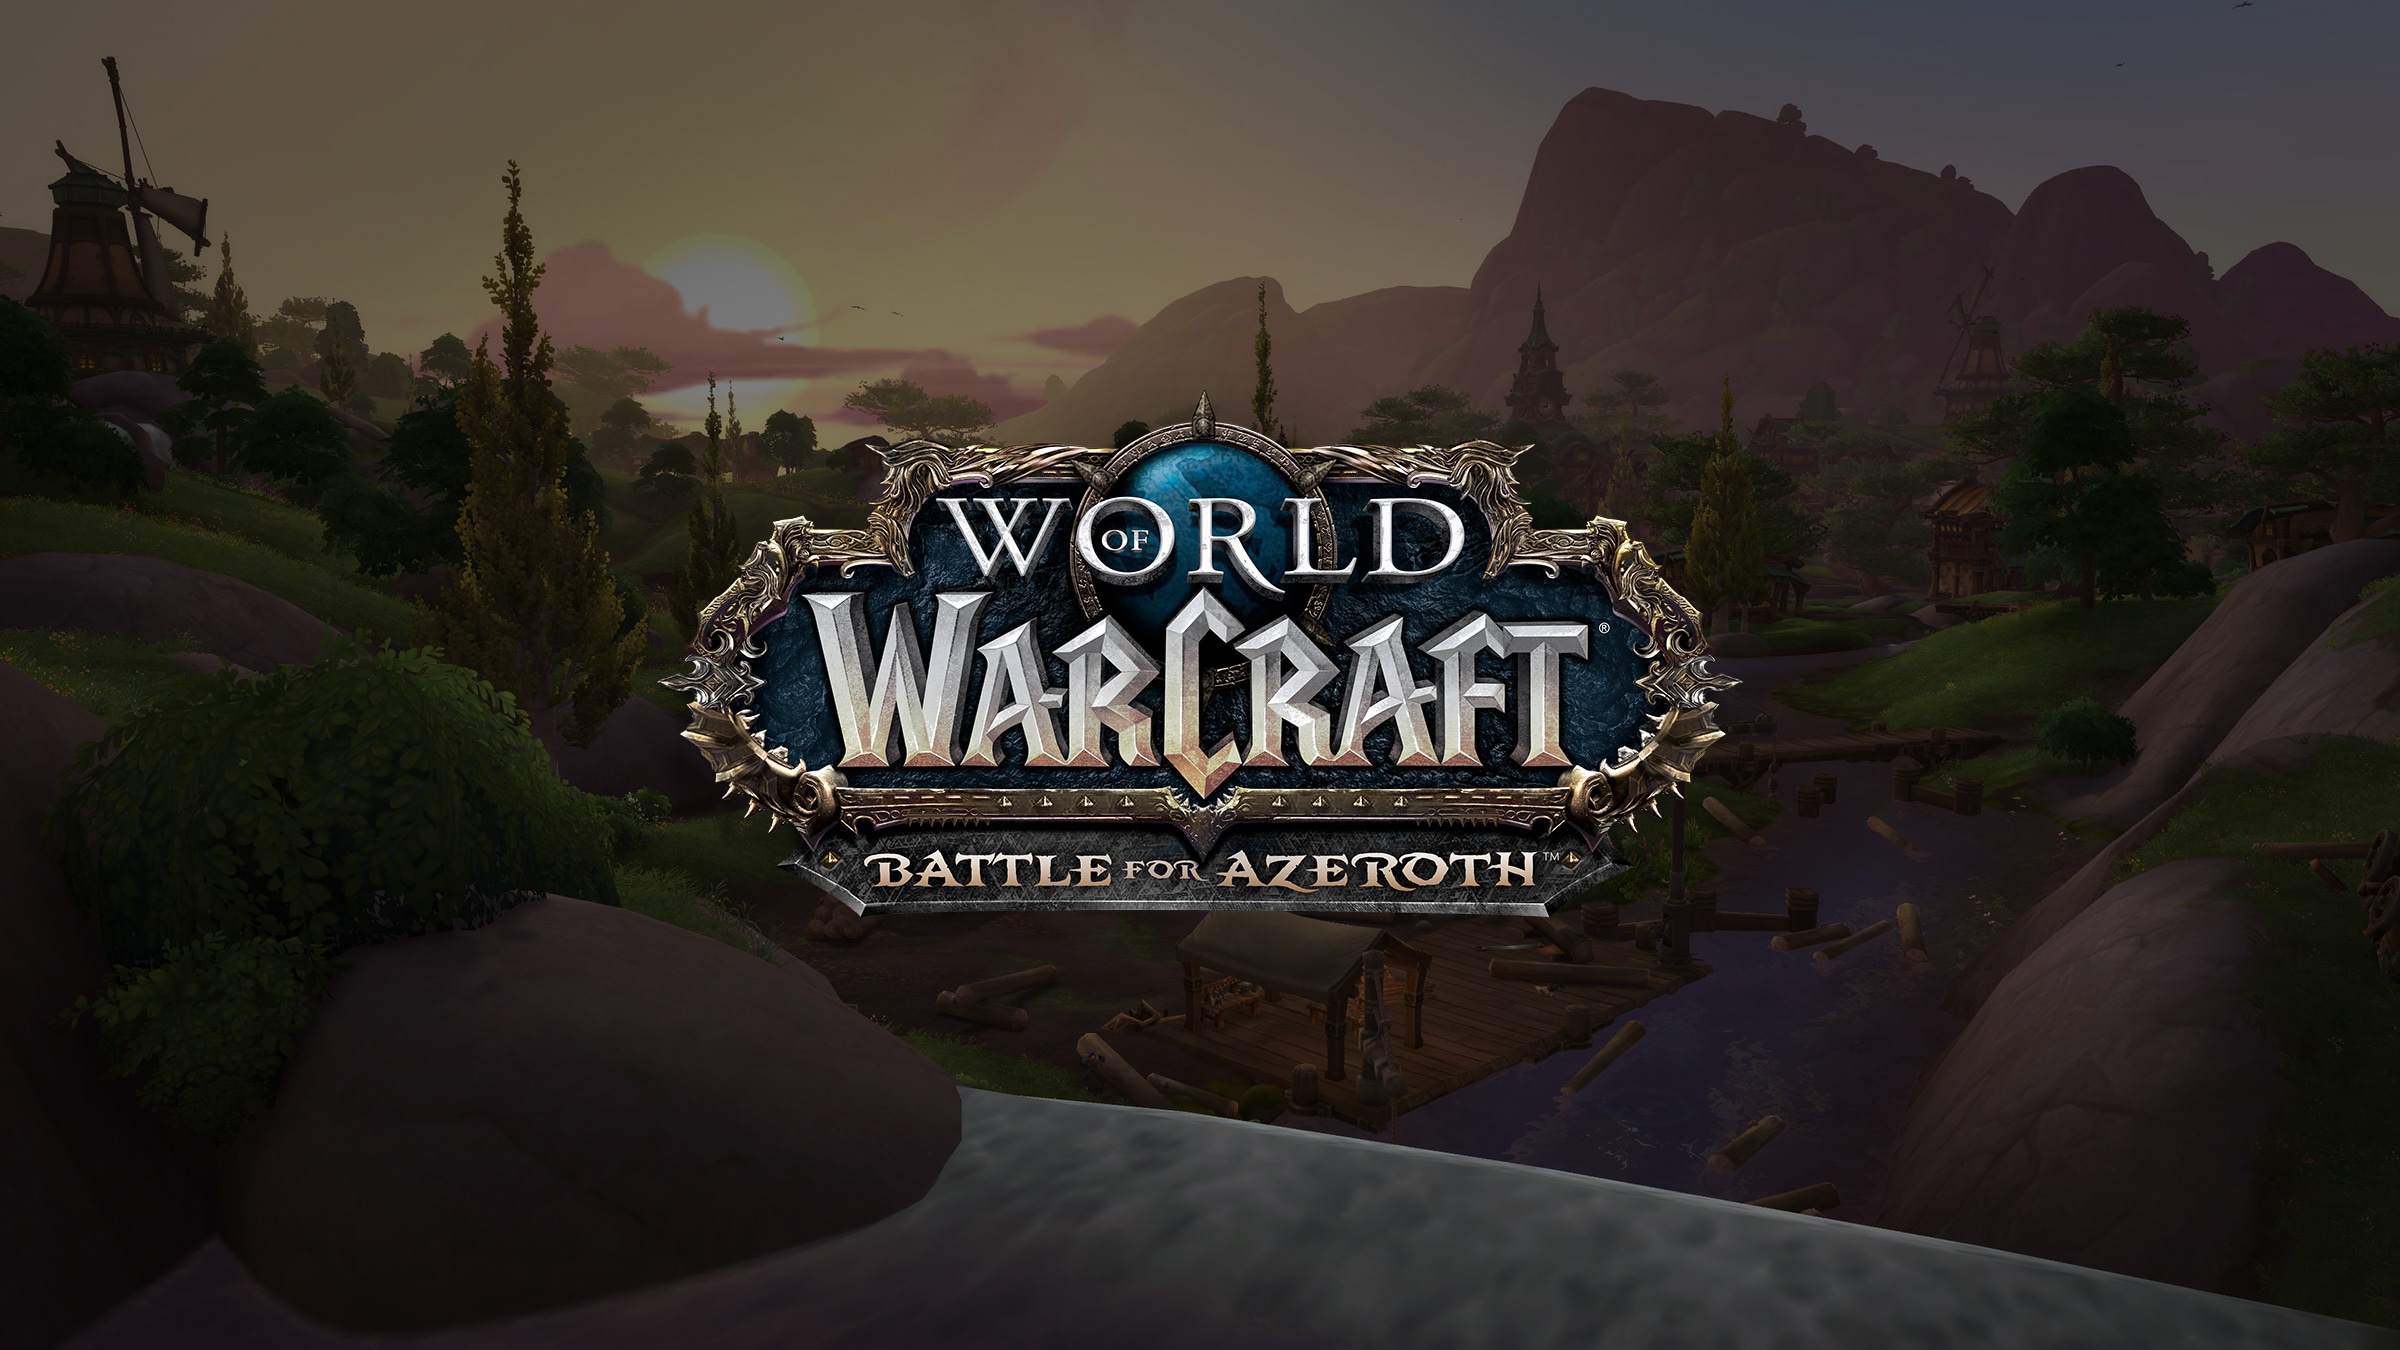 Anteprima Battle for Azeroth: «Before the Storm», tema musicale principale